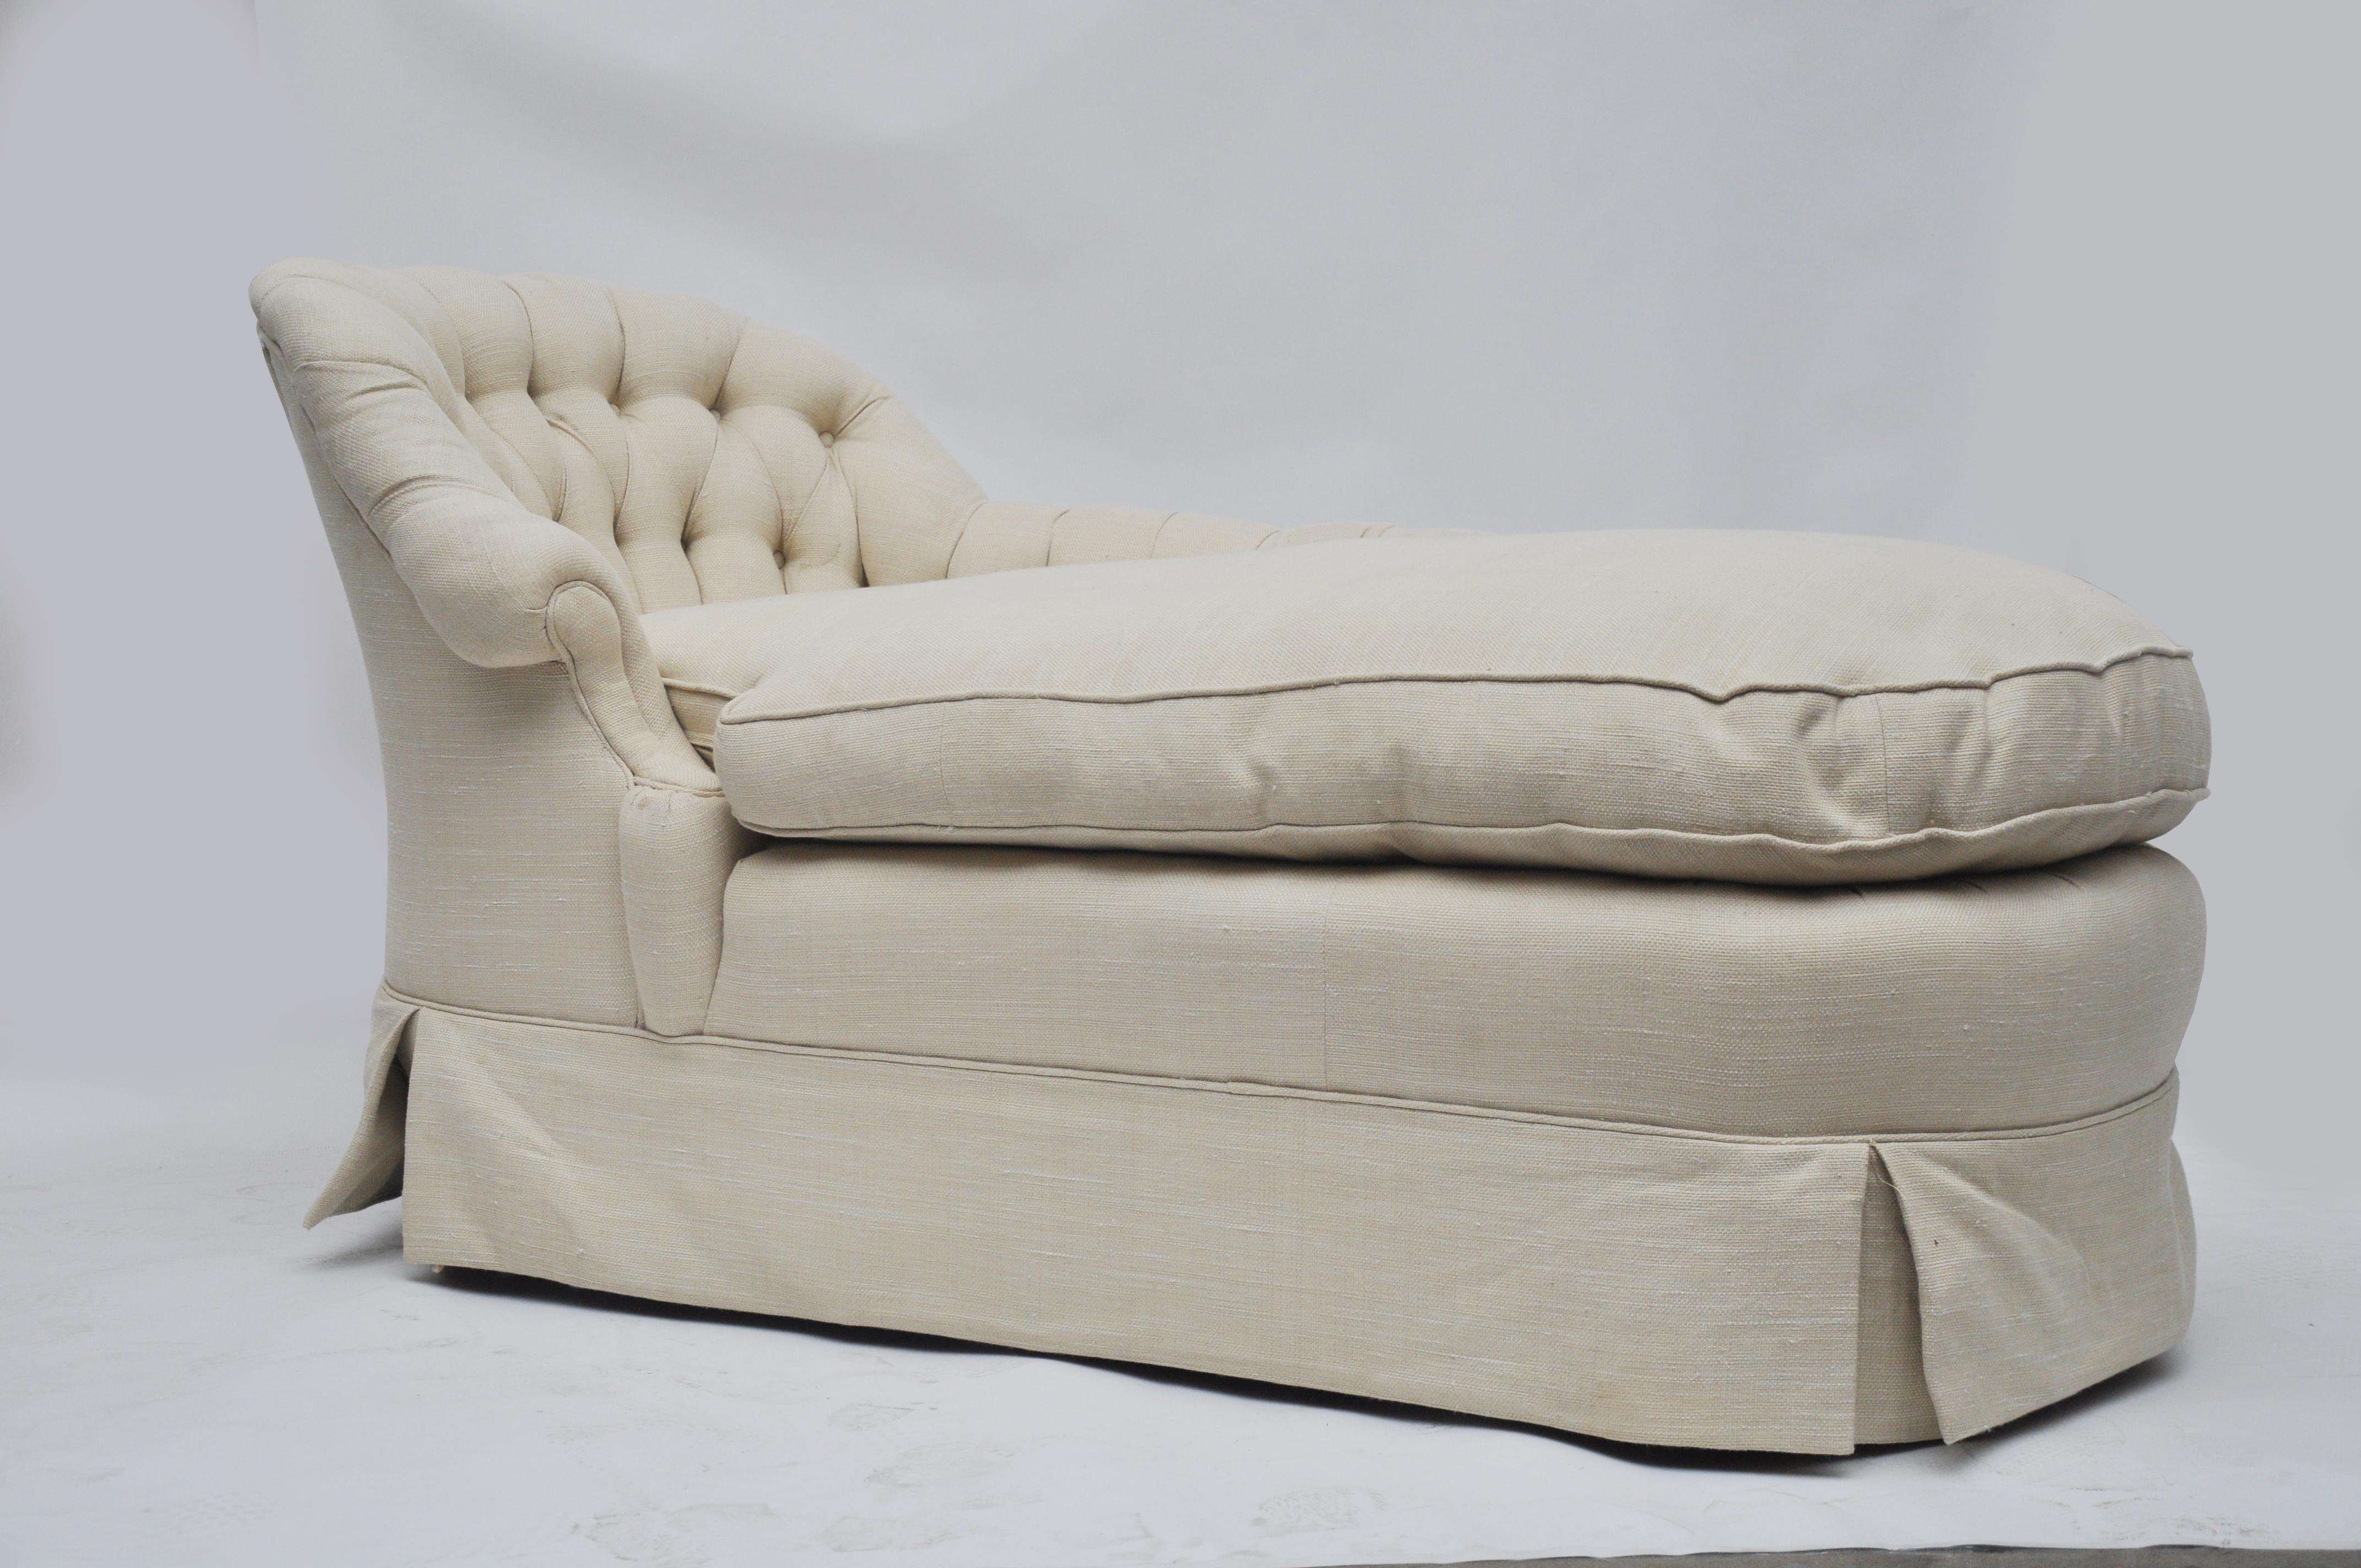 Tufted Back Chaise Lounge Chair (Mitte des 20. Jahrhunderts)